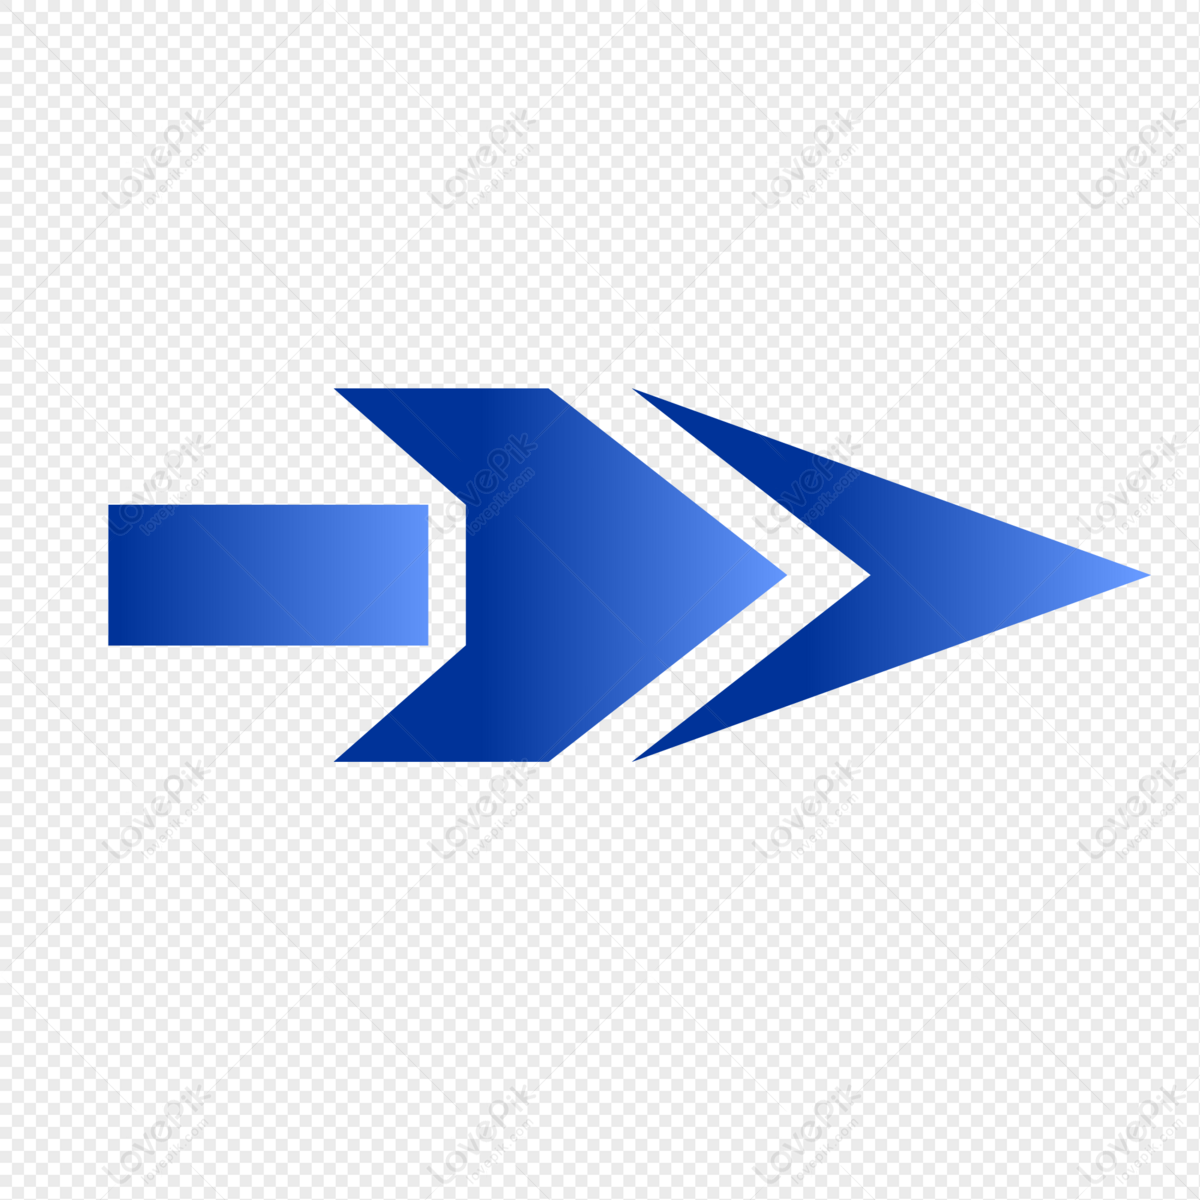 File:Blue curved arrow.svg - Wikimedia Commons